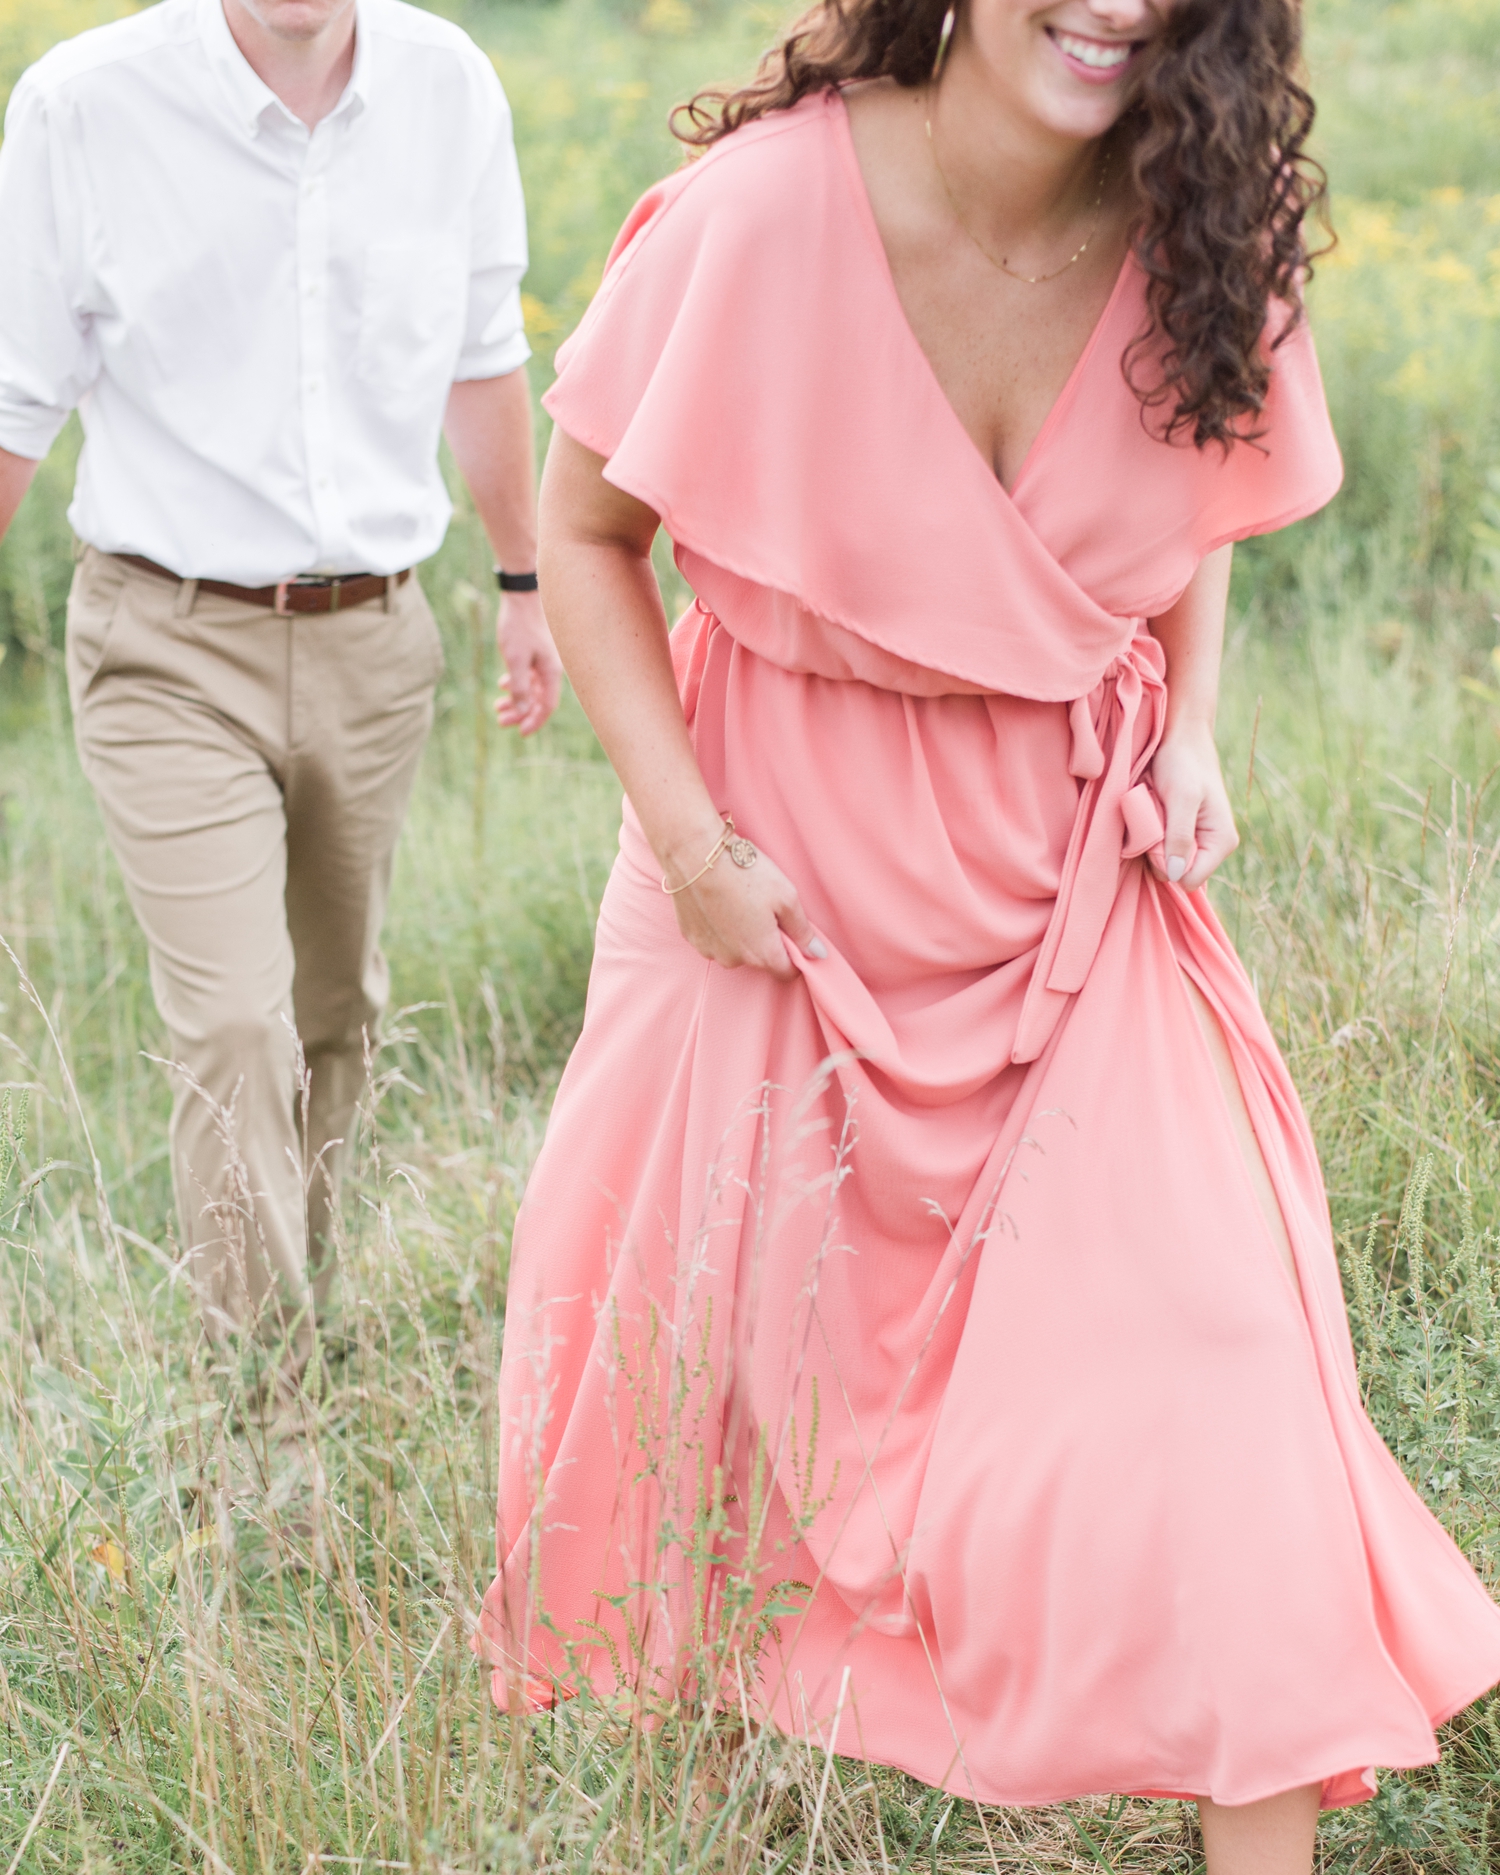 Photo of engaged couple at Matea County Park Engagement Session by Courtney Rudicel Wedding Photographer in Indiana